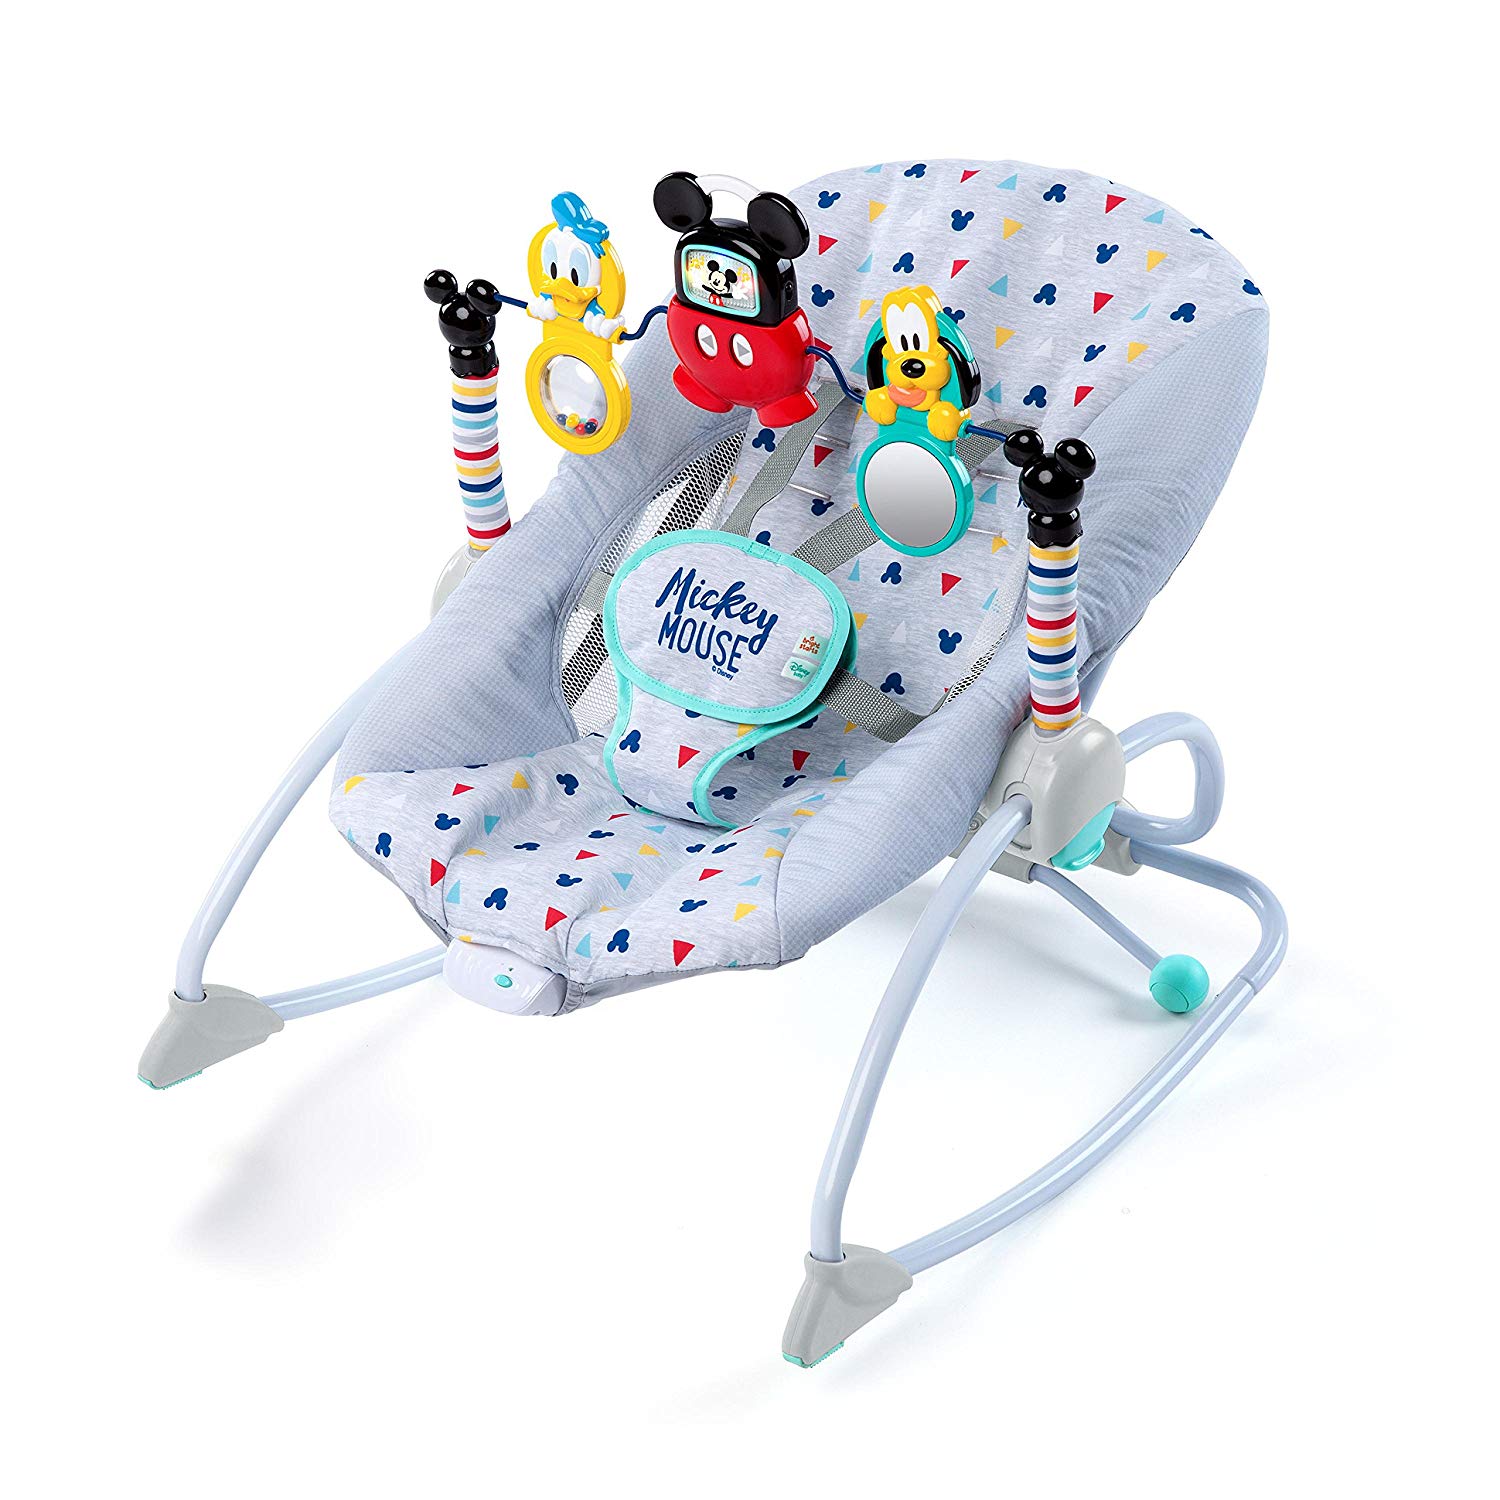 Bright Starts, Disney Baby, Mickey Mouse seesaw for babies and toddlers, with lights and melodies, 5-point harness, non-slip feet and lots of Disney toys